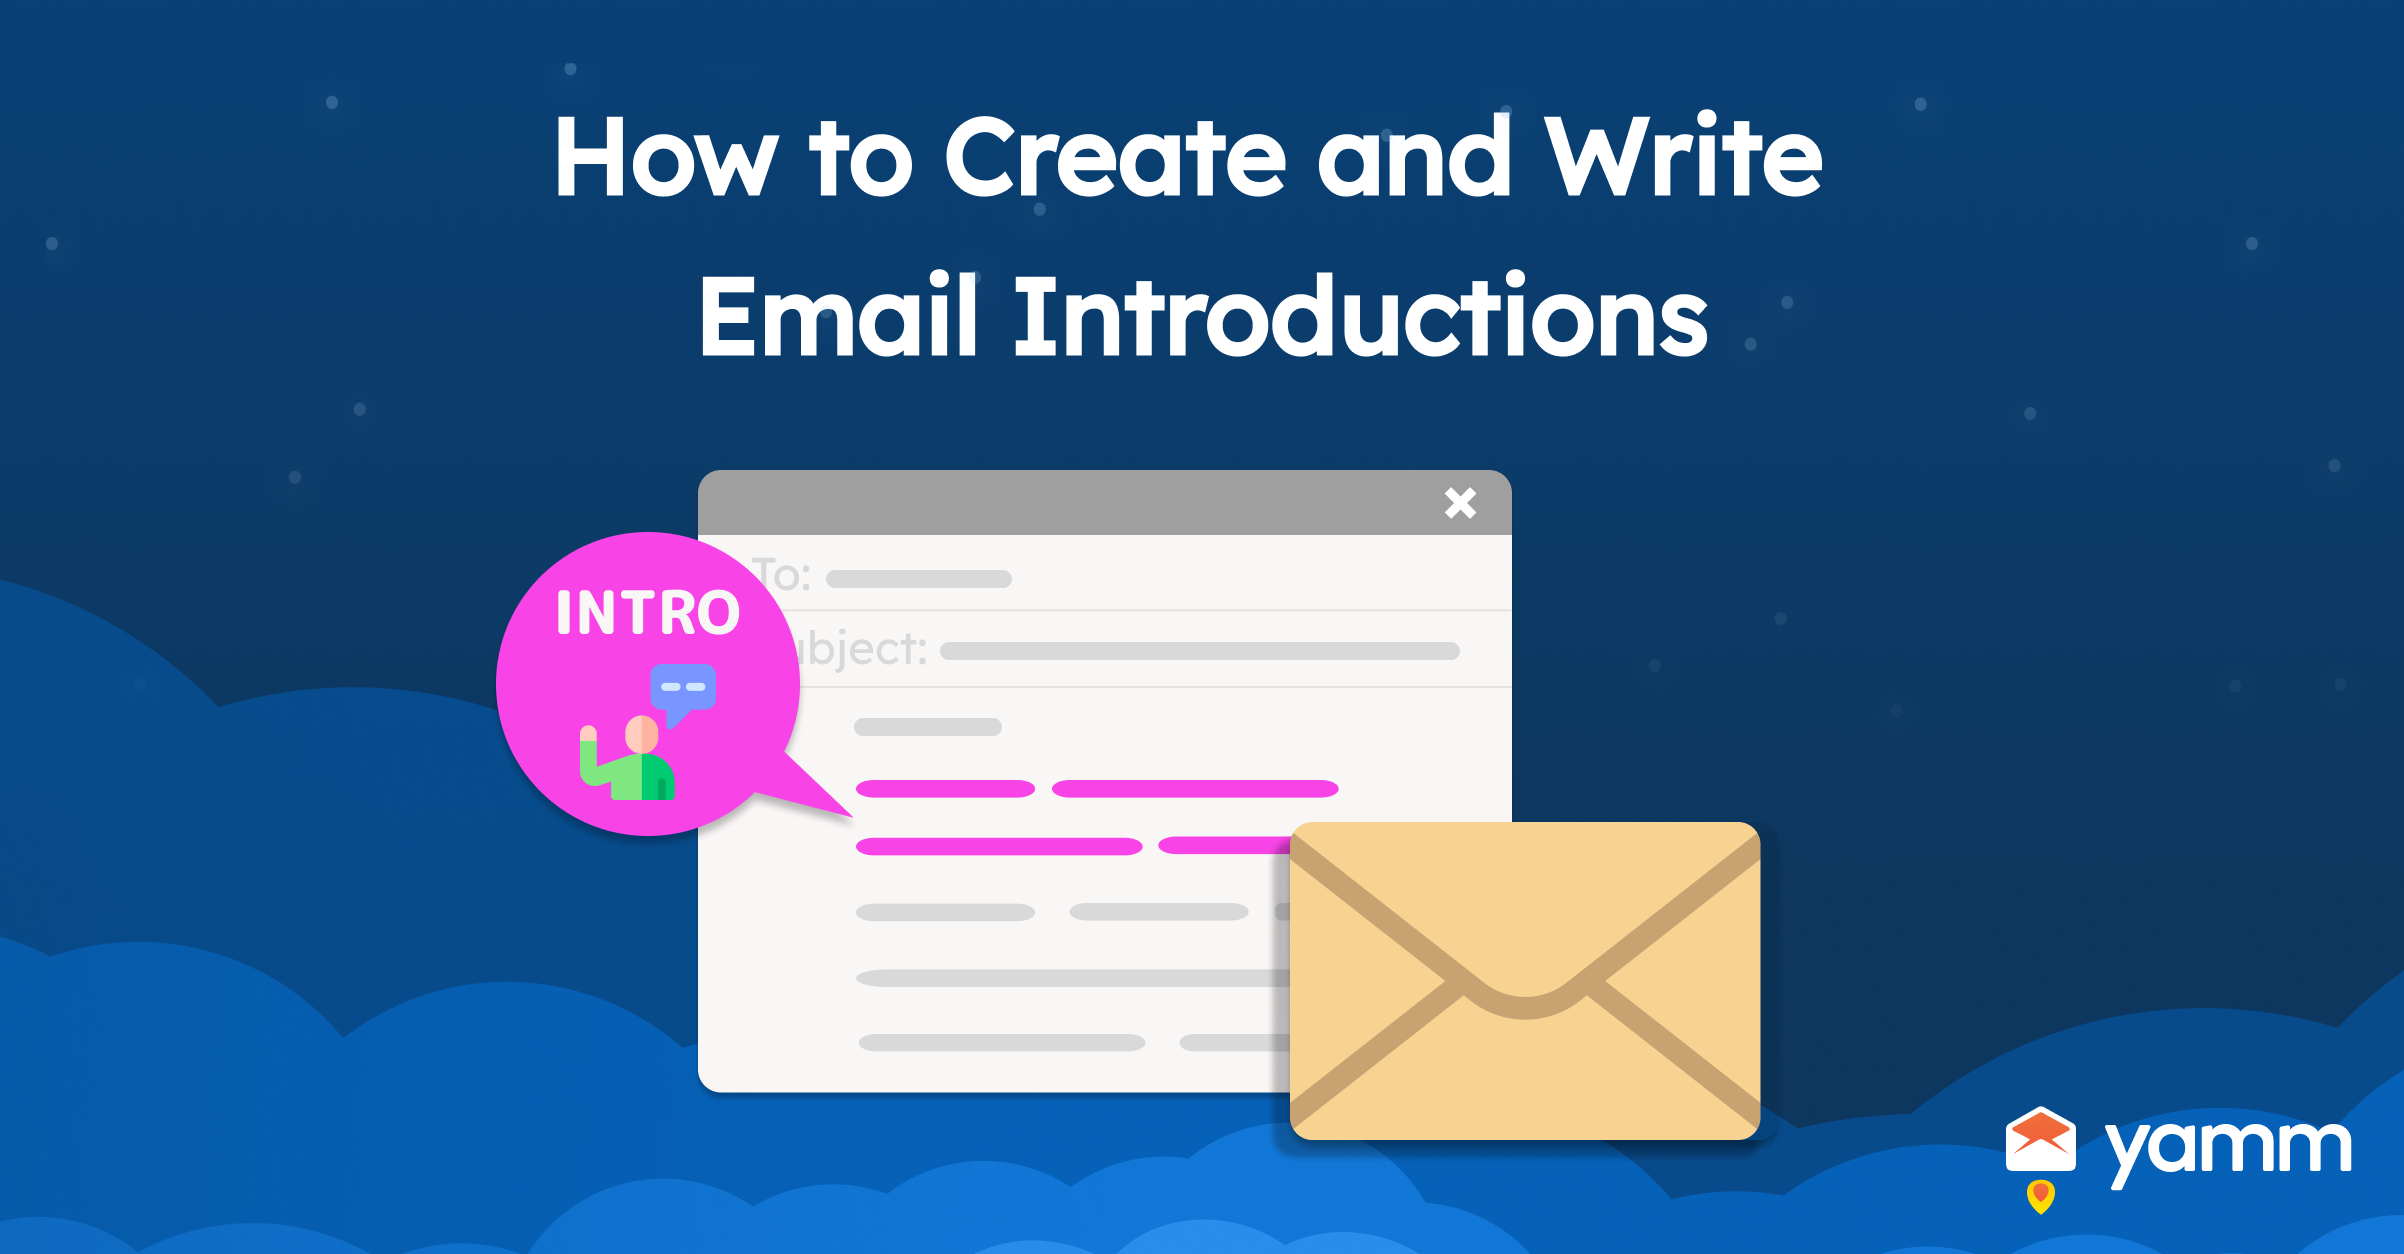 How to Create and Write Email Introductions